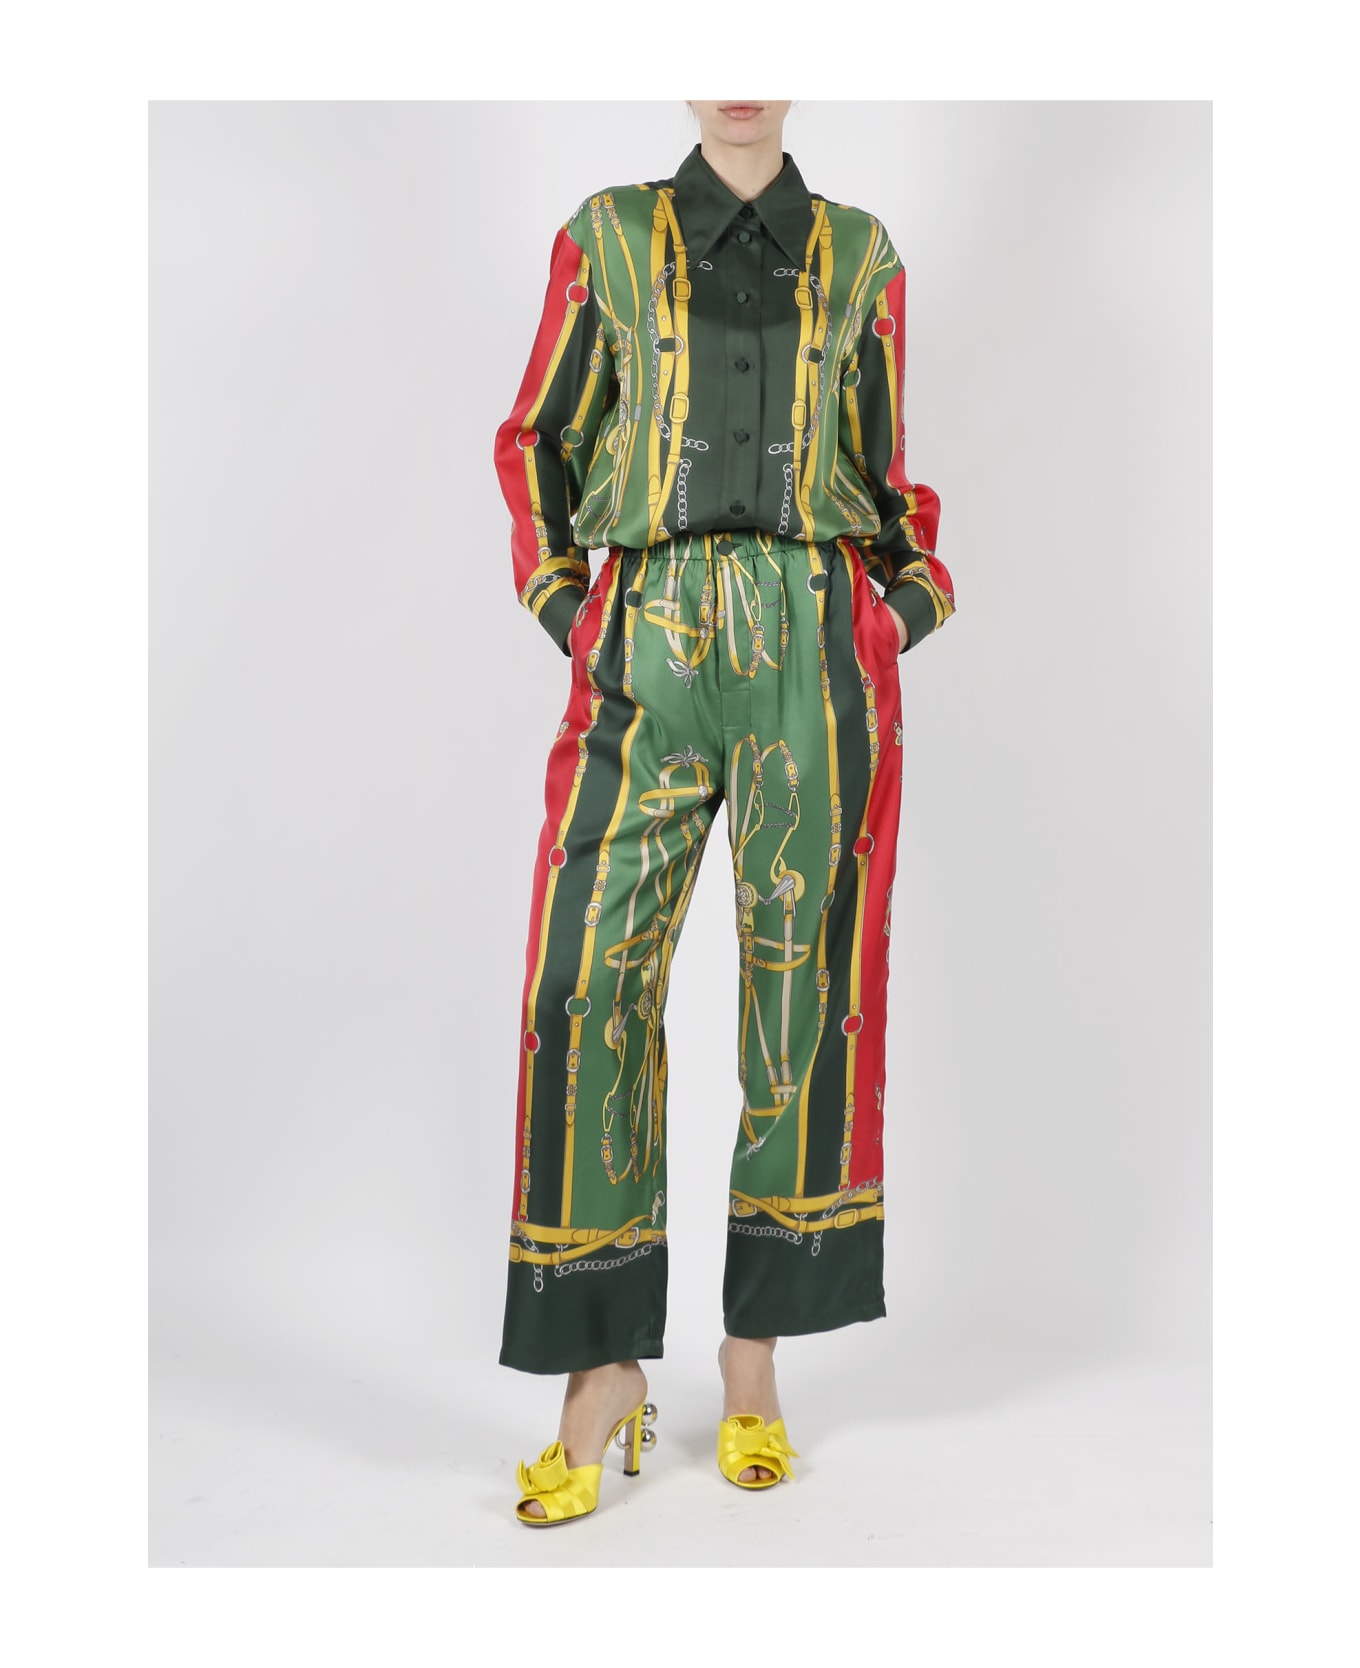 Gucci Harness And Double G Silk Shirt - Green